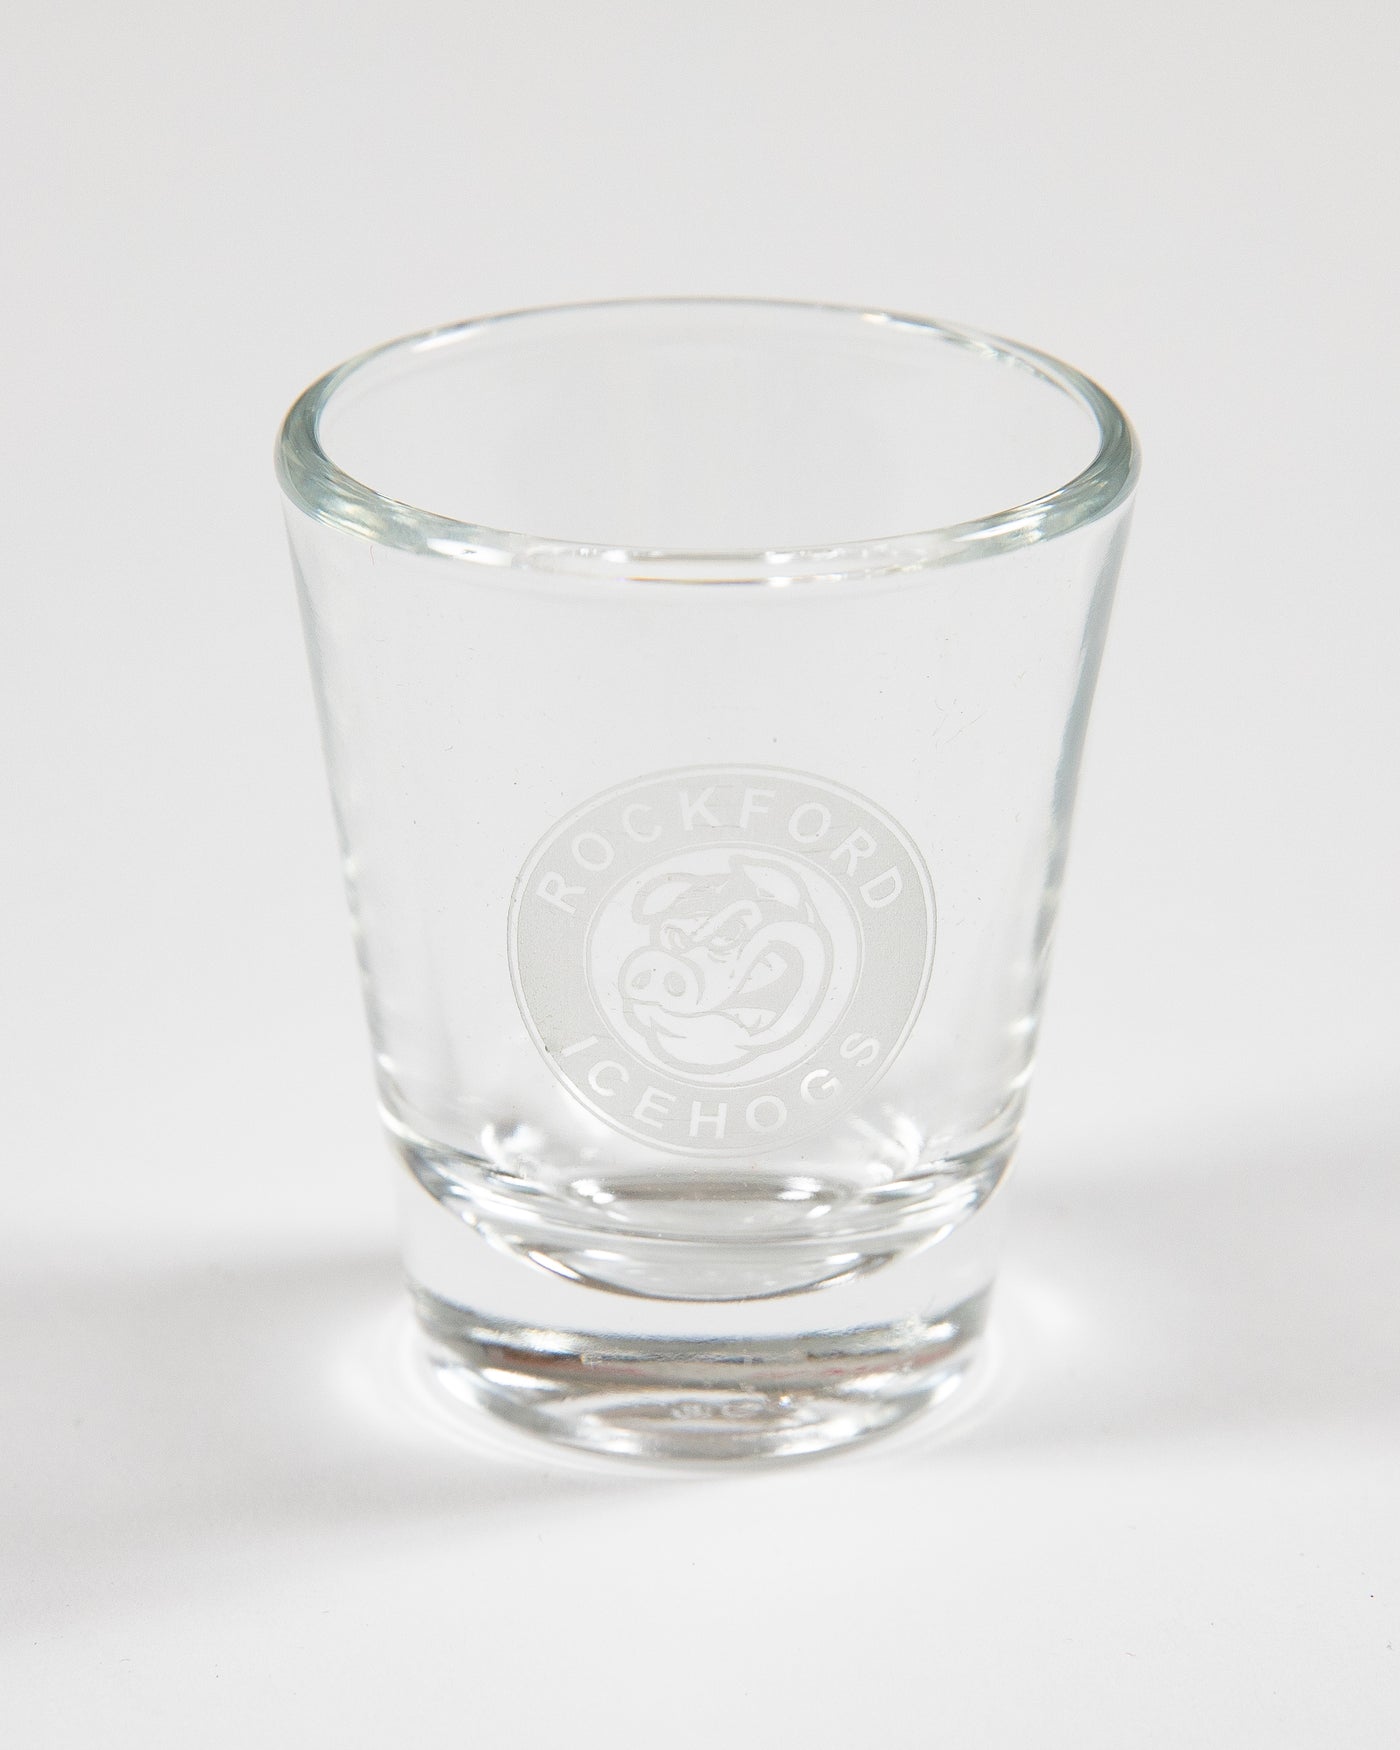 Rockford IceHogs shot glass with white logo - front lay flat